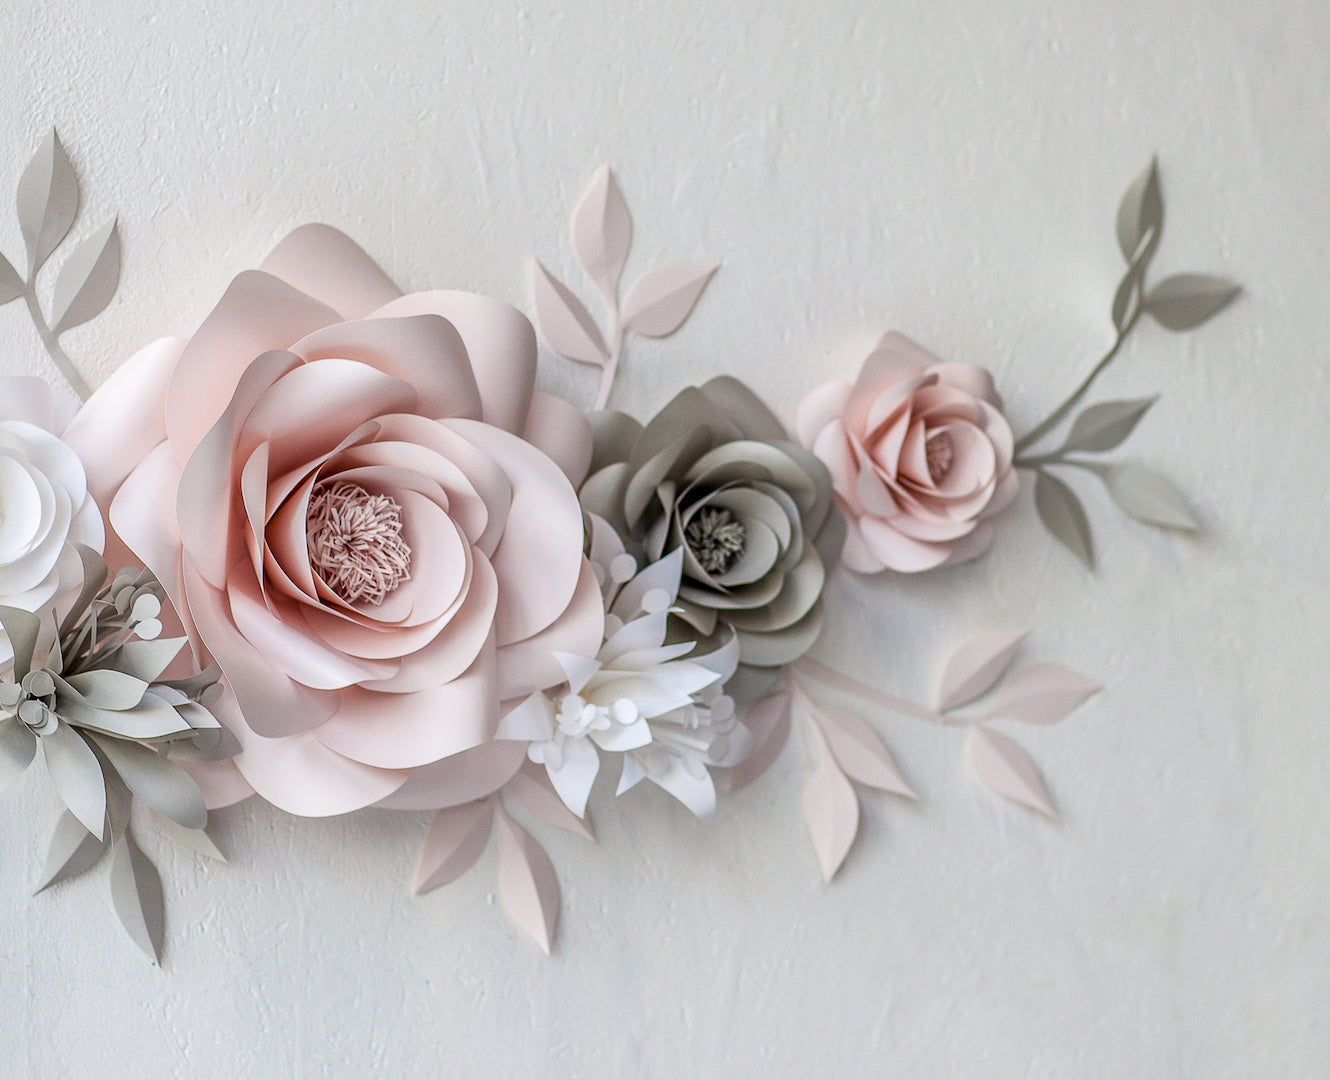 Enhance your baby's room with the subtle elegance of Blush, White, and Light Grey nursery wallpaper flowers